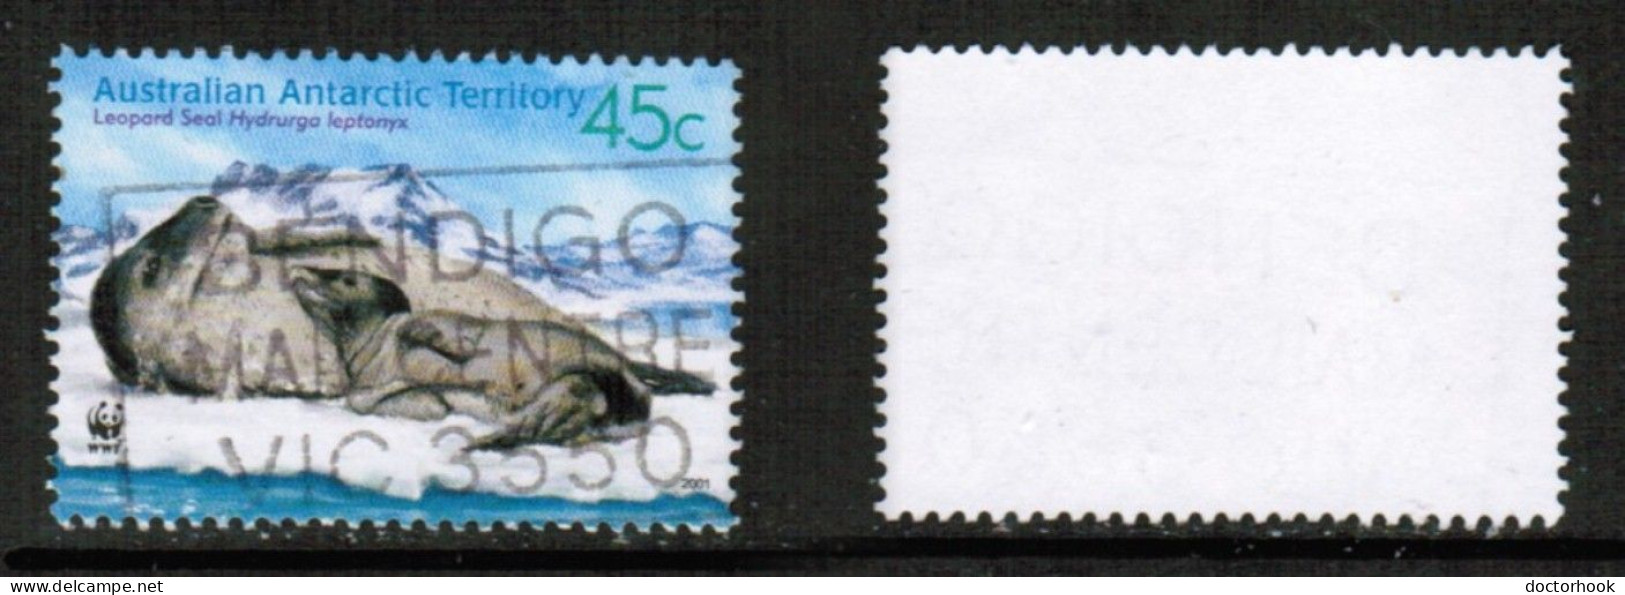 AUSTRALIAN ANTARCTIC TERRITORY   Scott # L 118a USED (CONDITION AS PER SCAN) (Stamp Scan # 930-11) - Usati